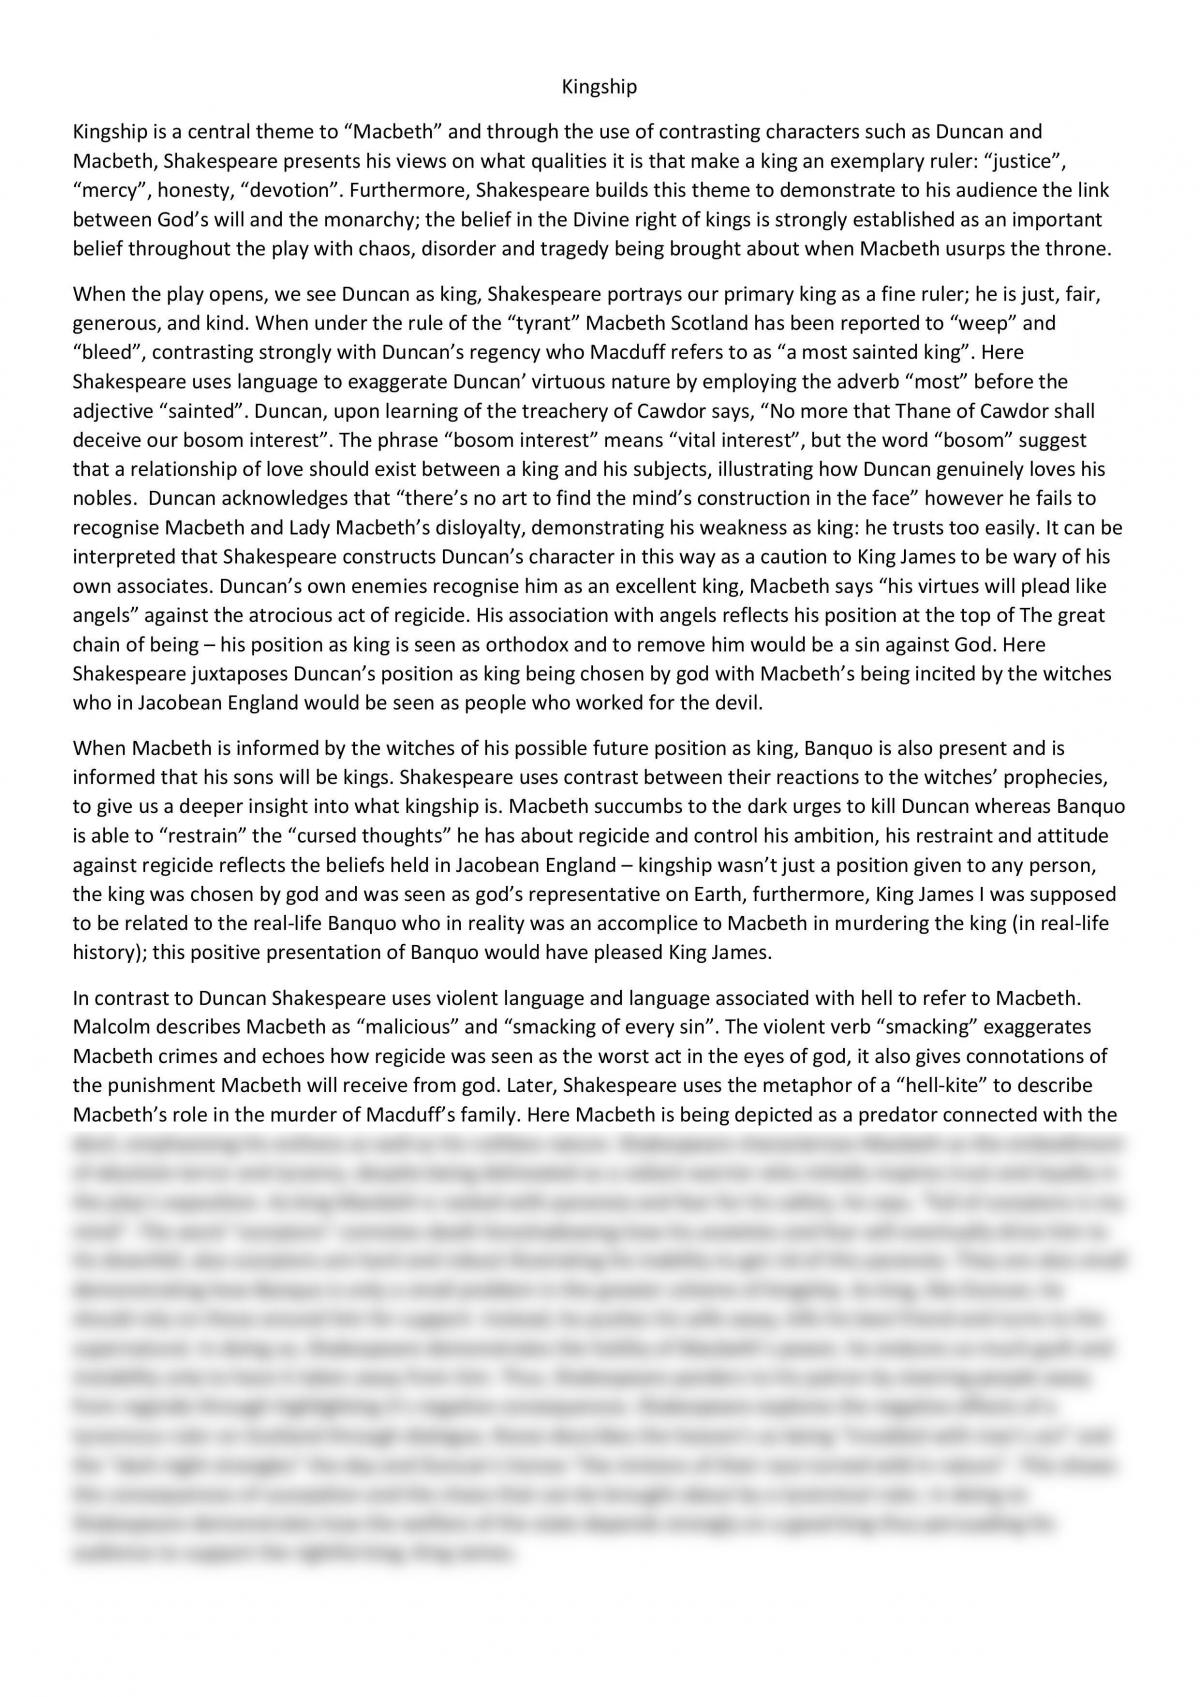 Essay exploring the importance of the theme of Kingship in Macbeth - Page 1